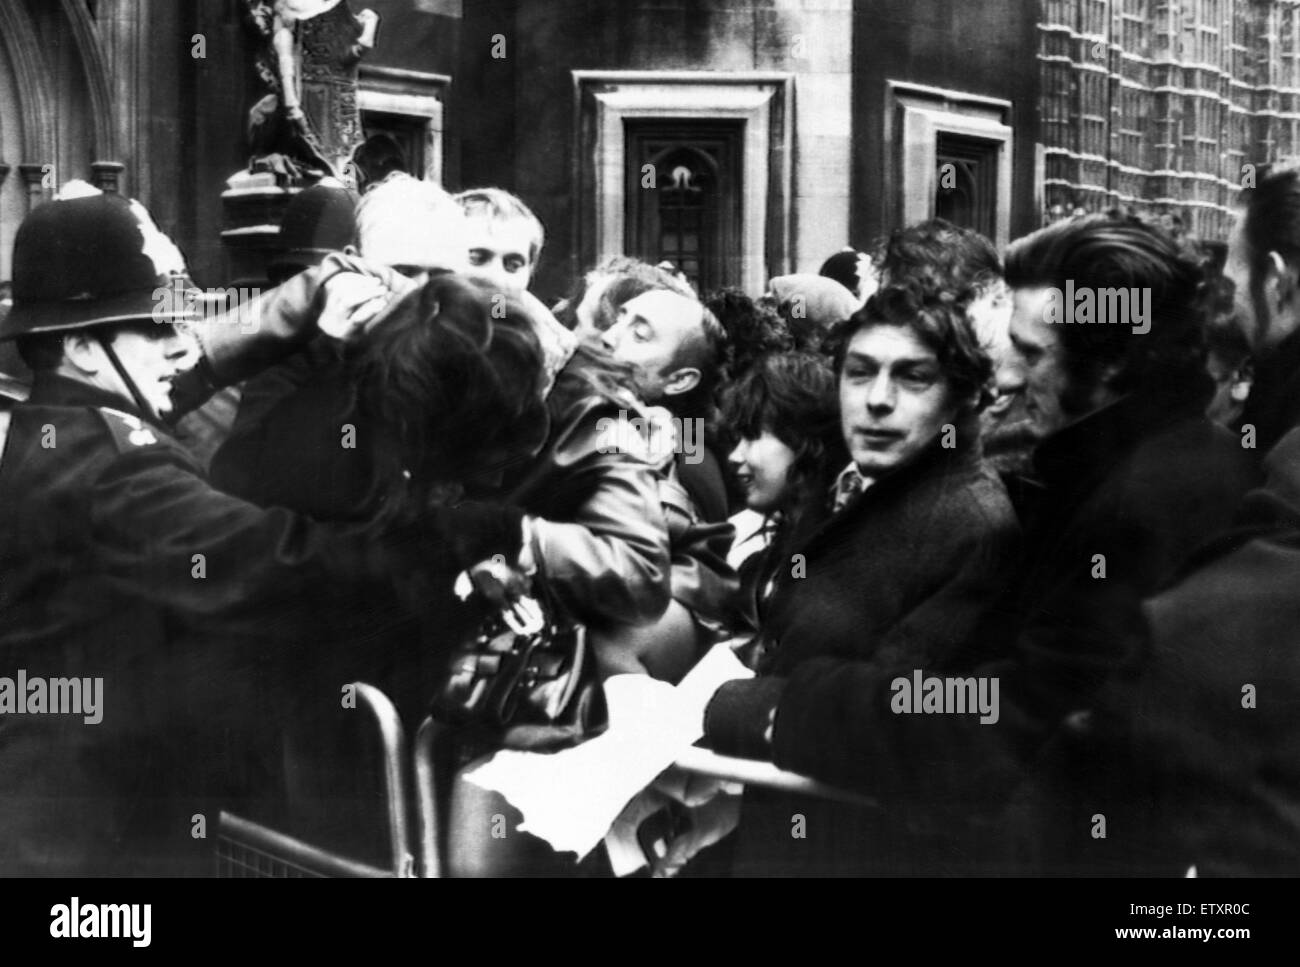 1972 Miners Strike. Demonstration outside House of Commons, London, Friday 18th February 1972. The demonstrators from a number of unions and students massed outside the commons in an attempt to lobby MPs. Pictured, Demonstrators help a policeman to lift a Stock Photo